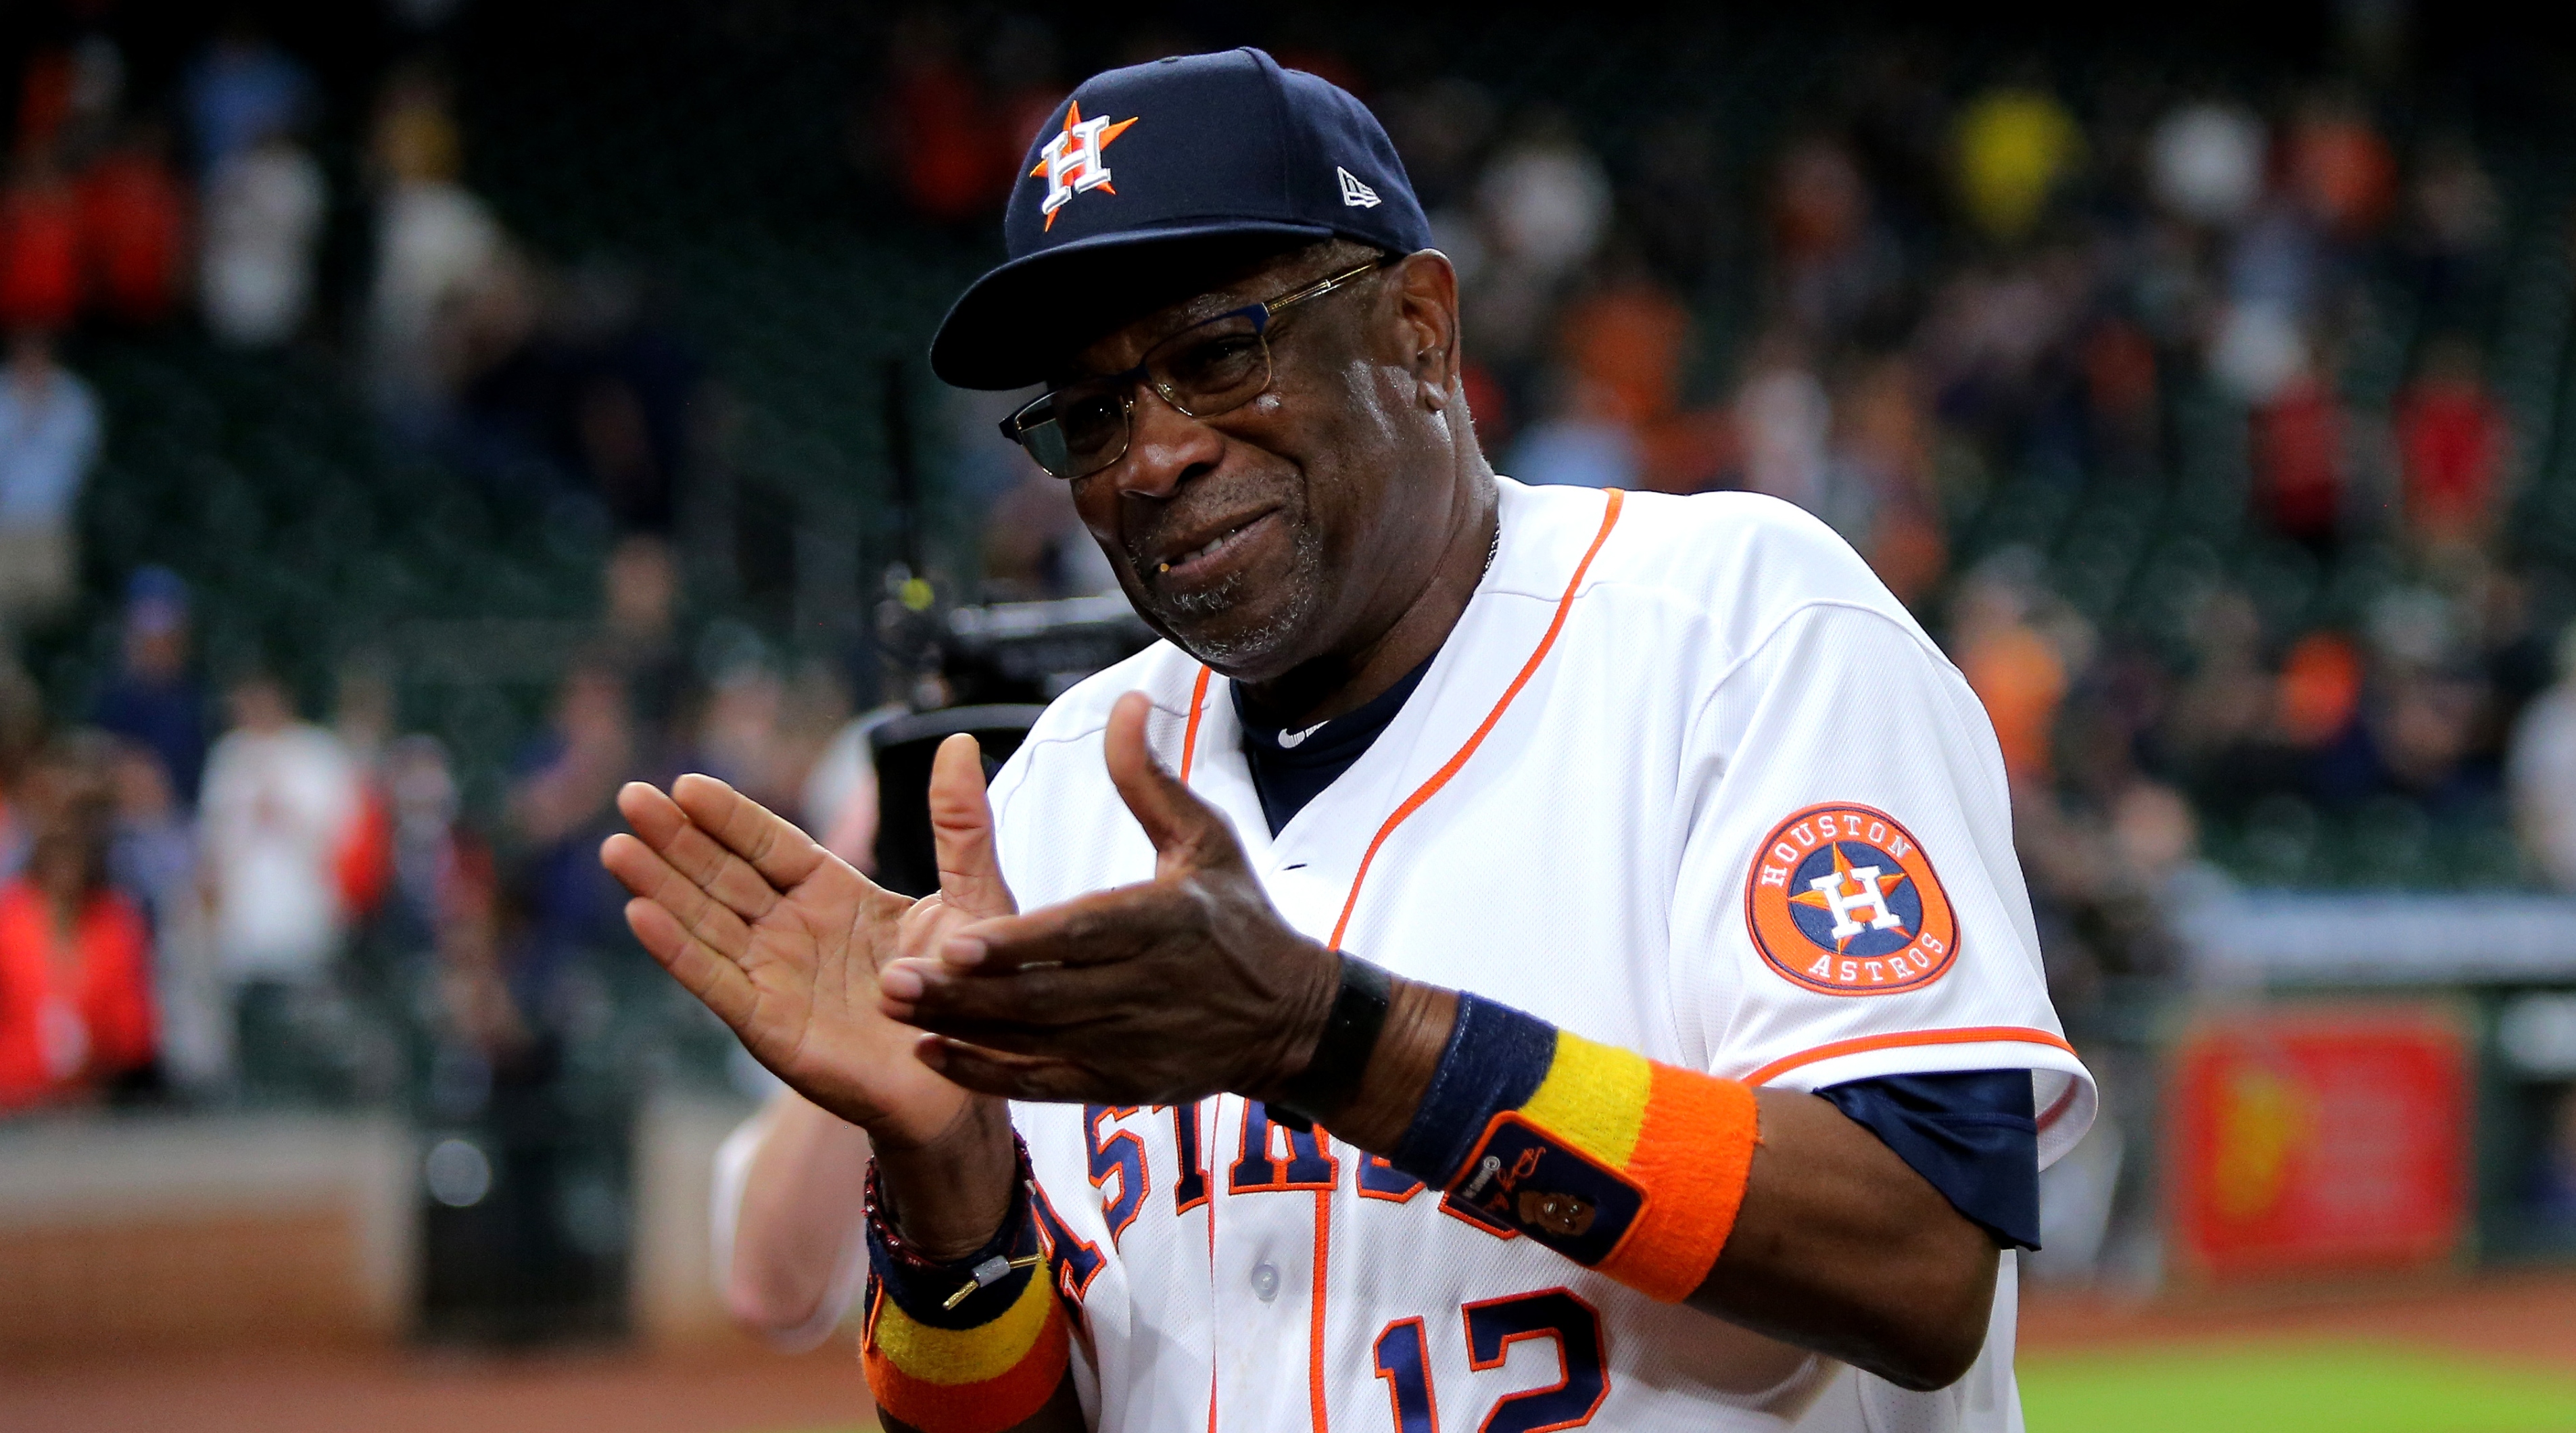 Houston Astros' Dusty Baker becomes first Black manager to win